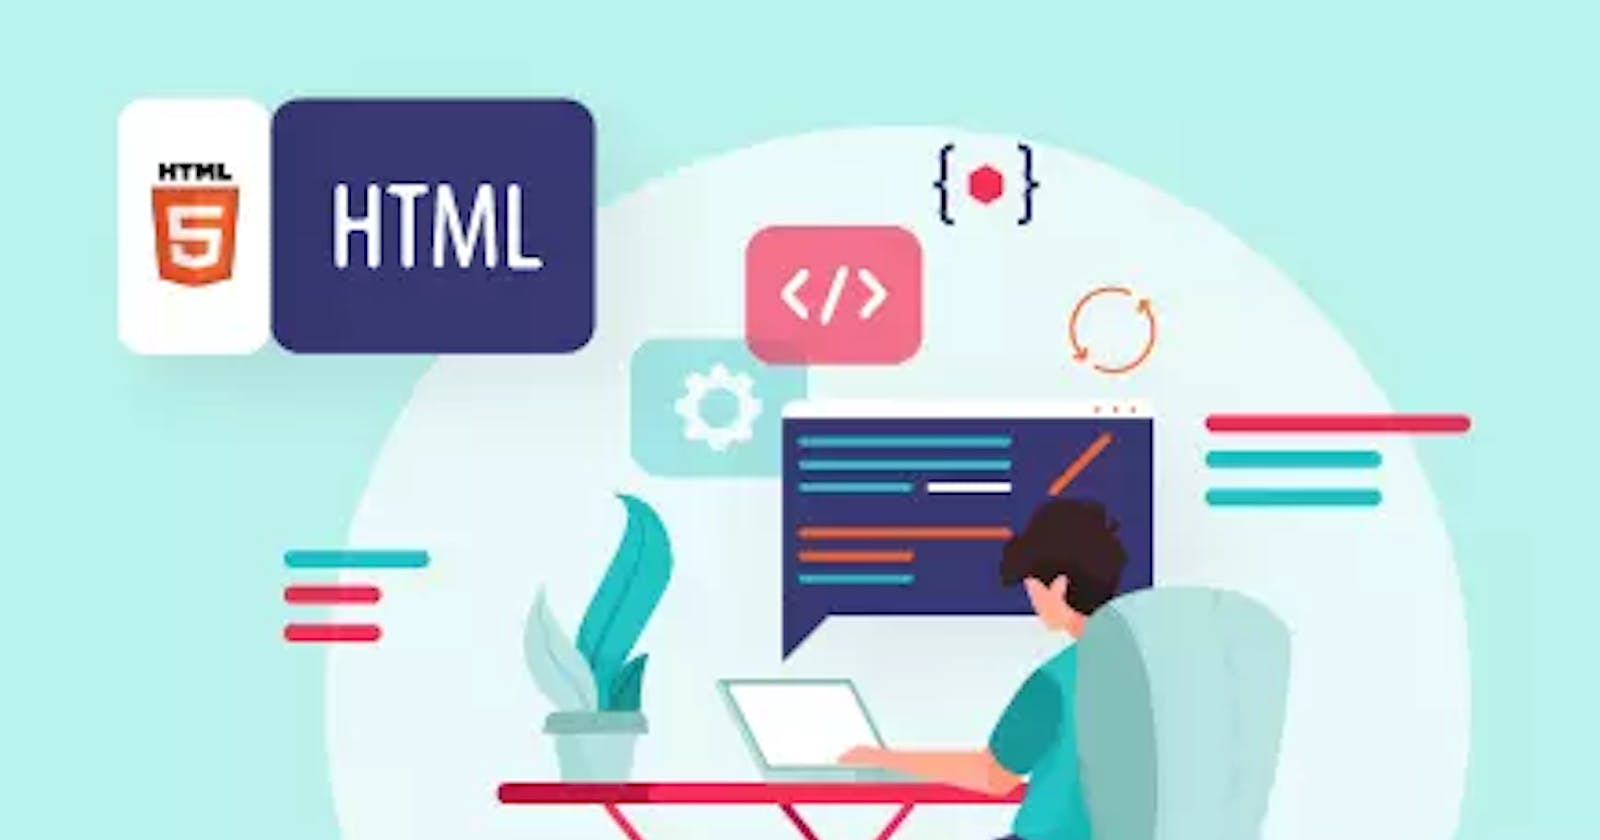 "How to HTML like a Boss: Tagging your way to Web Domination"